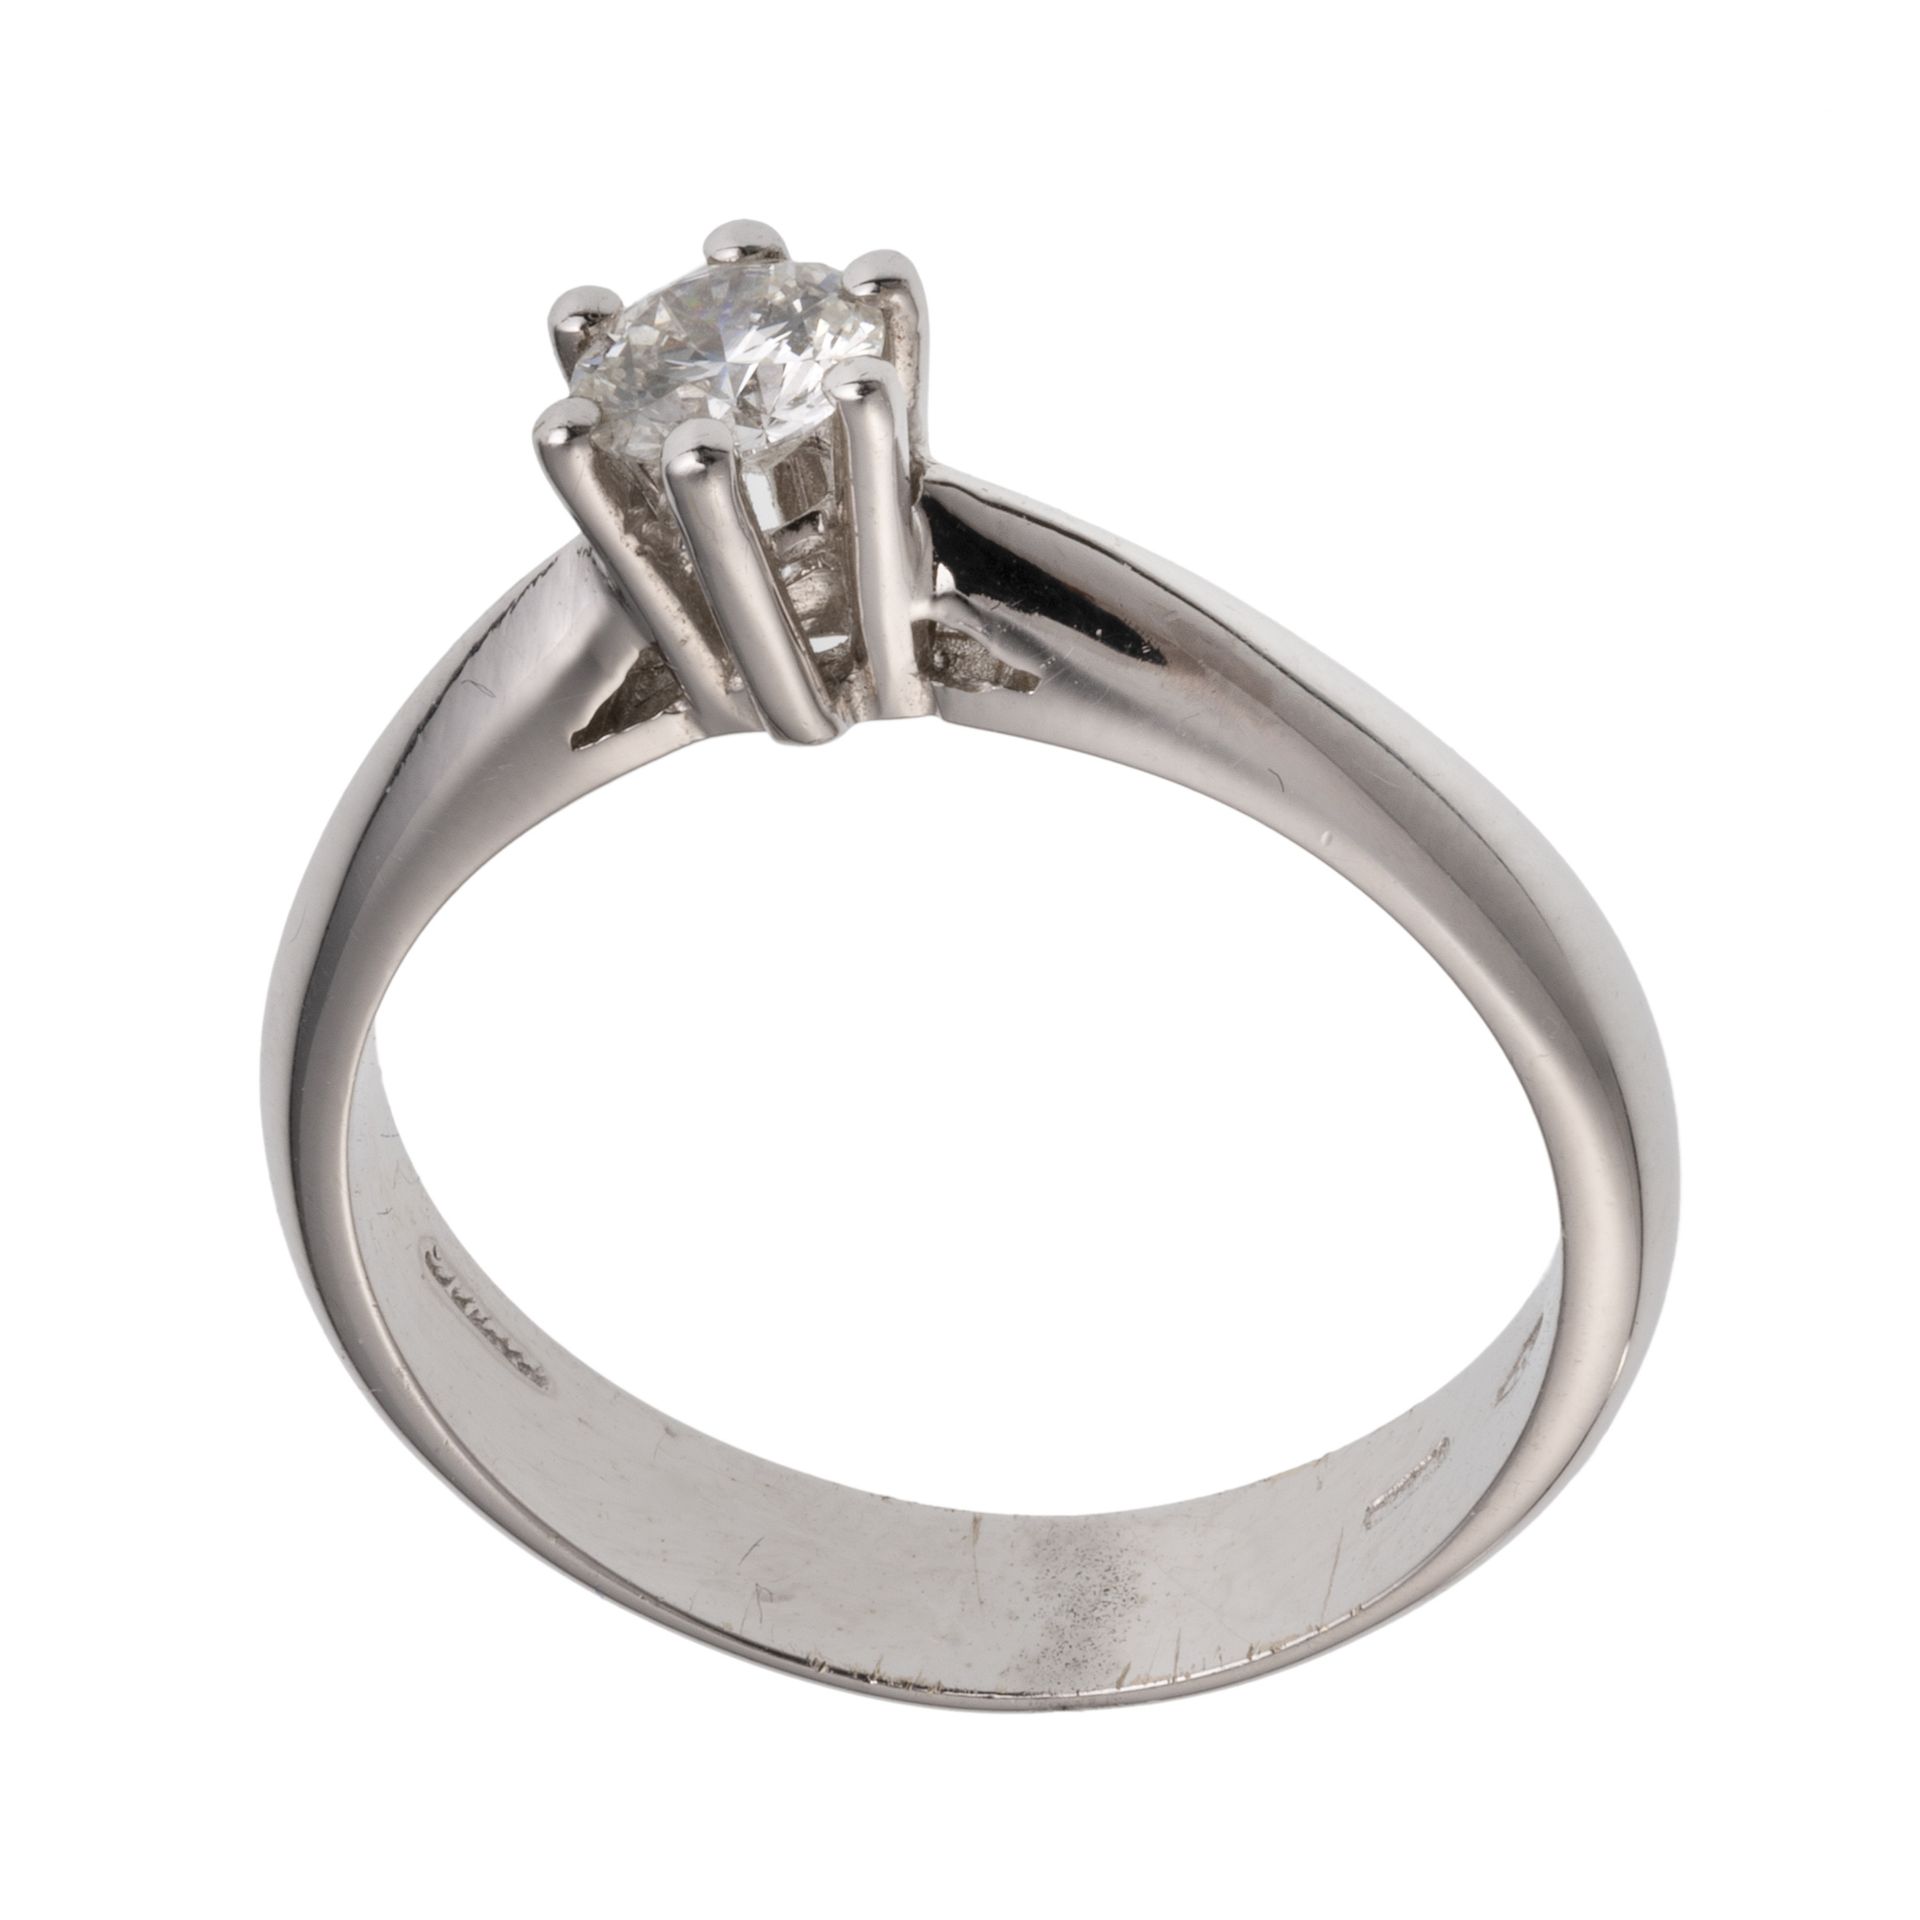 WHITE GOLD SOLITAIRE RING WITH CENTRAL DIAMOND